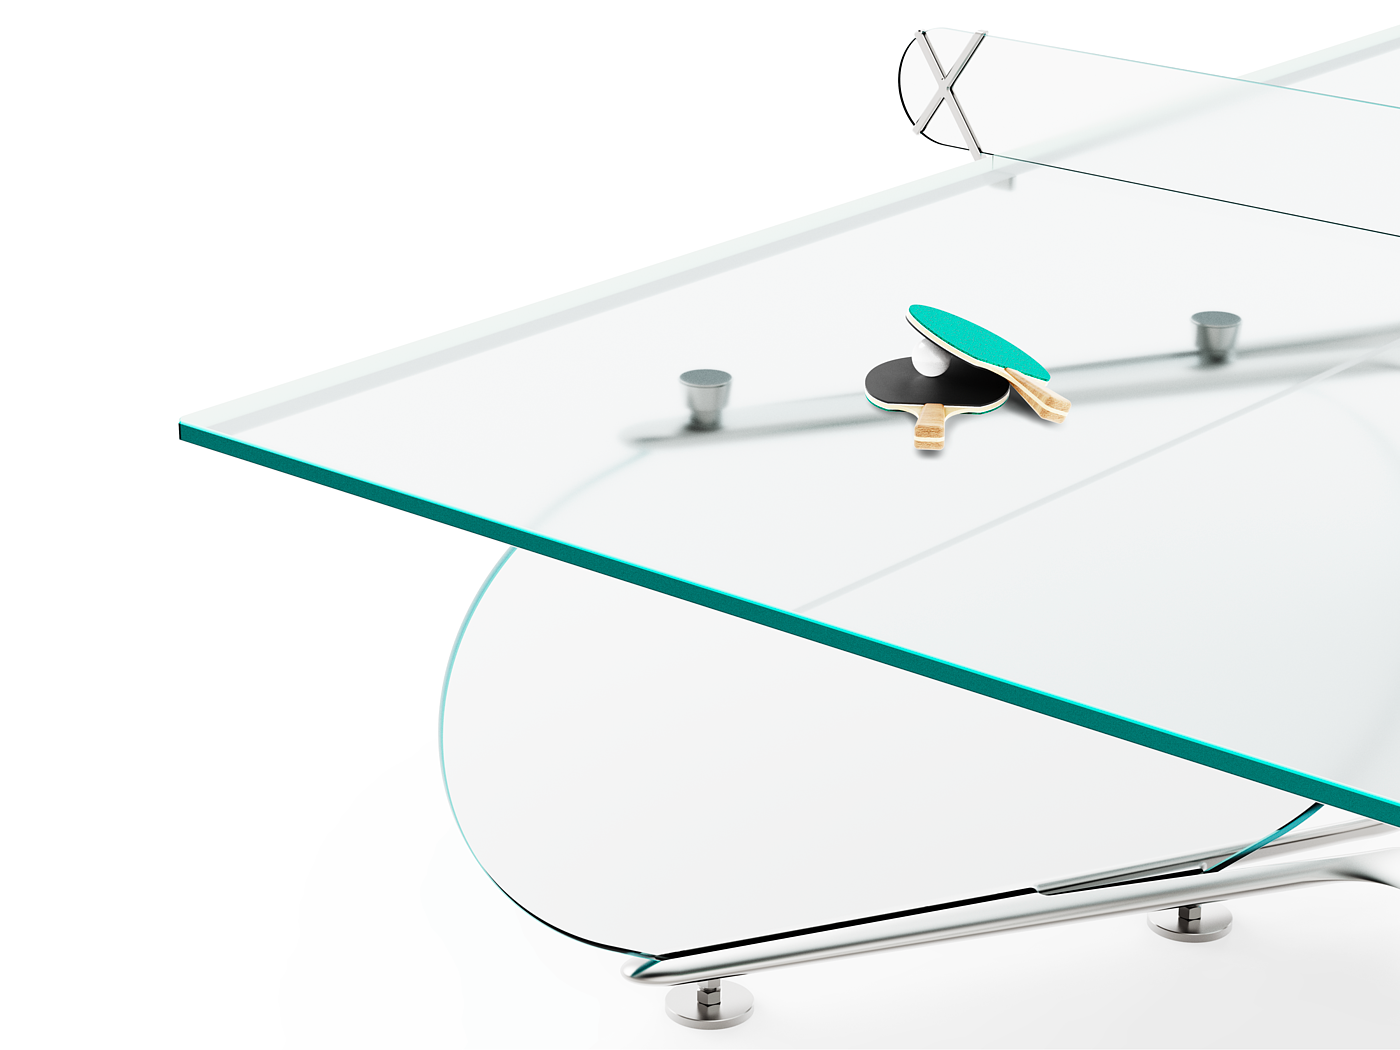 Qiocare Infinity-Glass Ping Pong Table